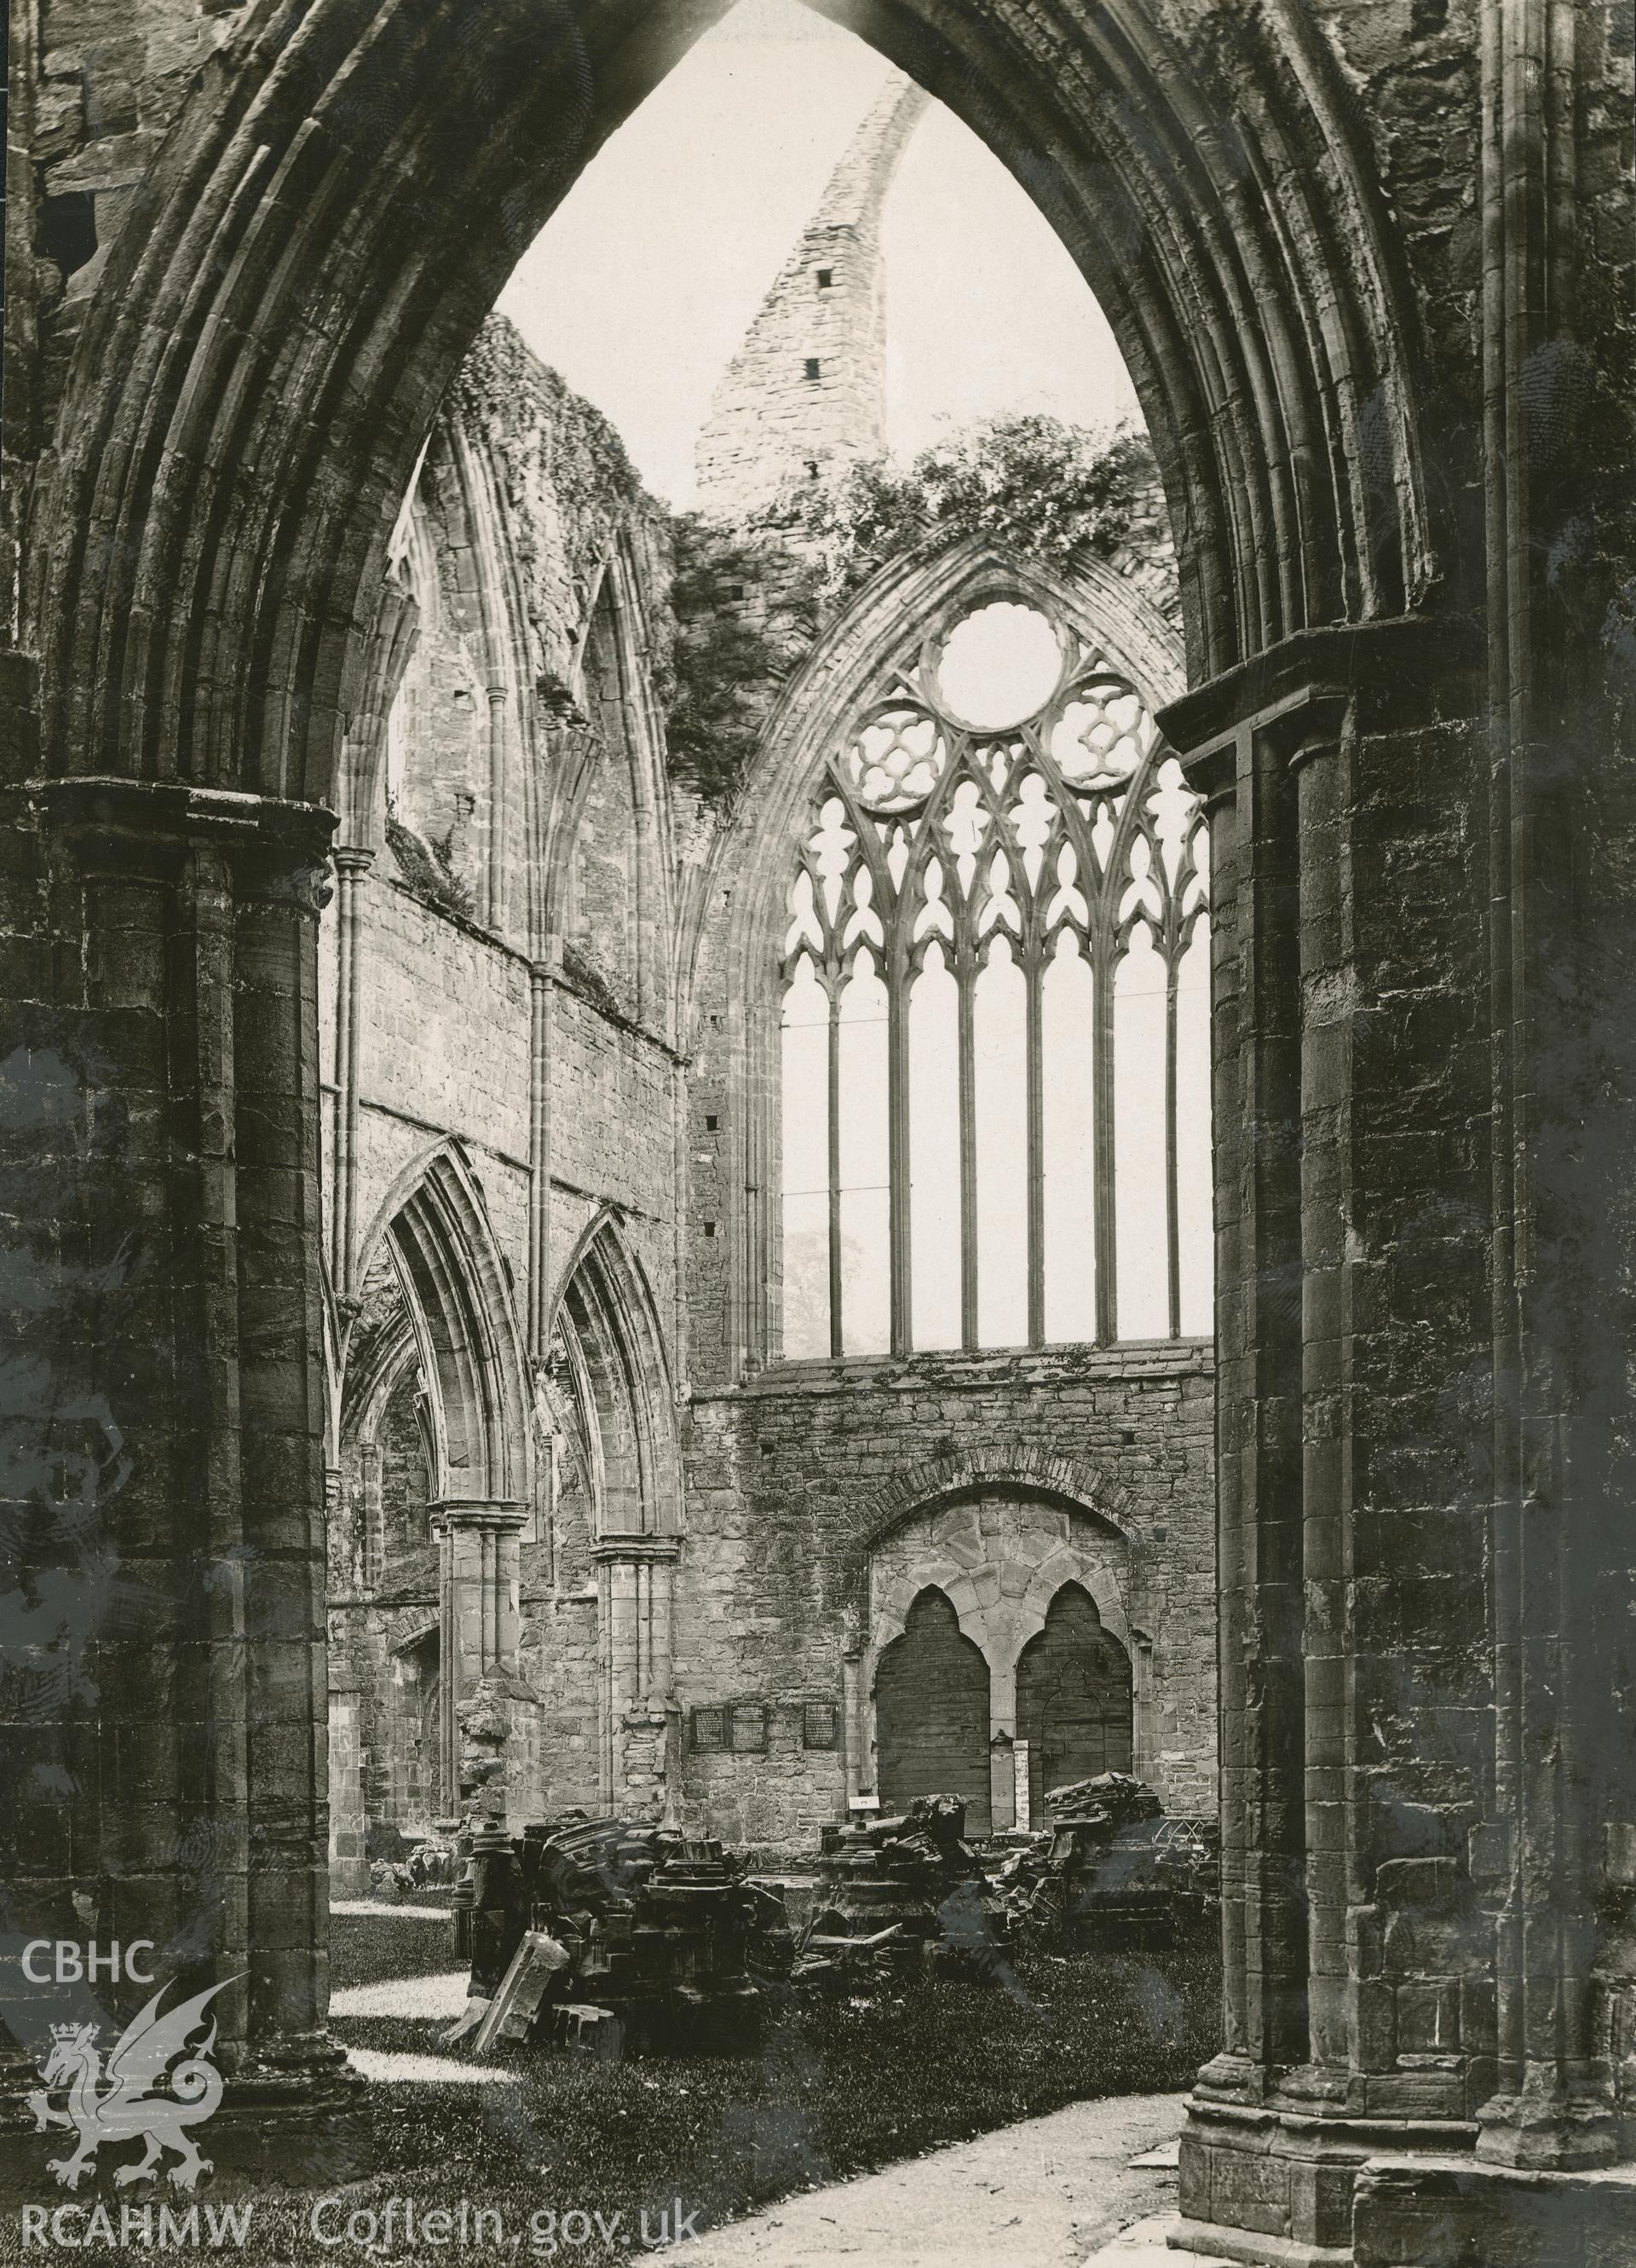 Digital copy of an early National Buildings Record photograph showing the west end of the nave at Tintern Abbey.